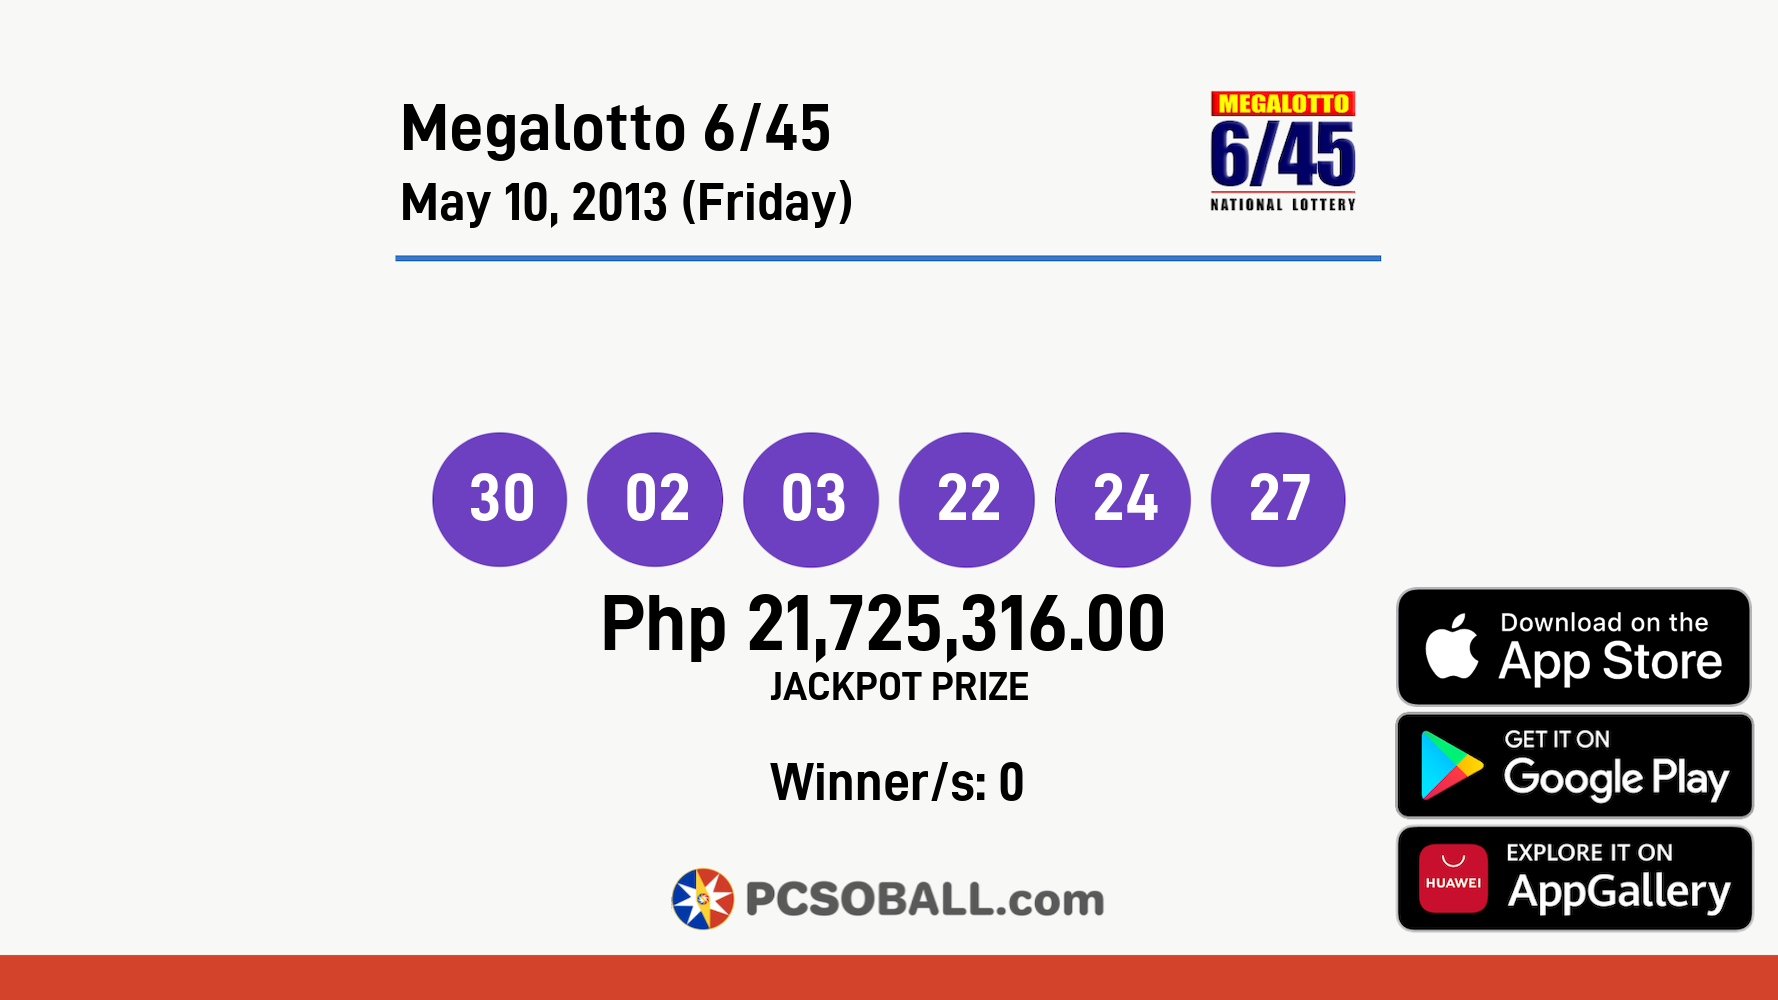 Megalotto 6/45 May 10, 2013 (Friday) Result